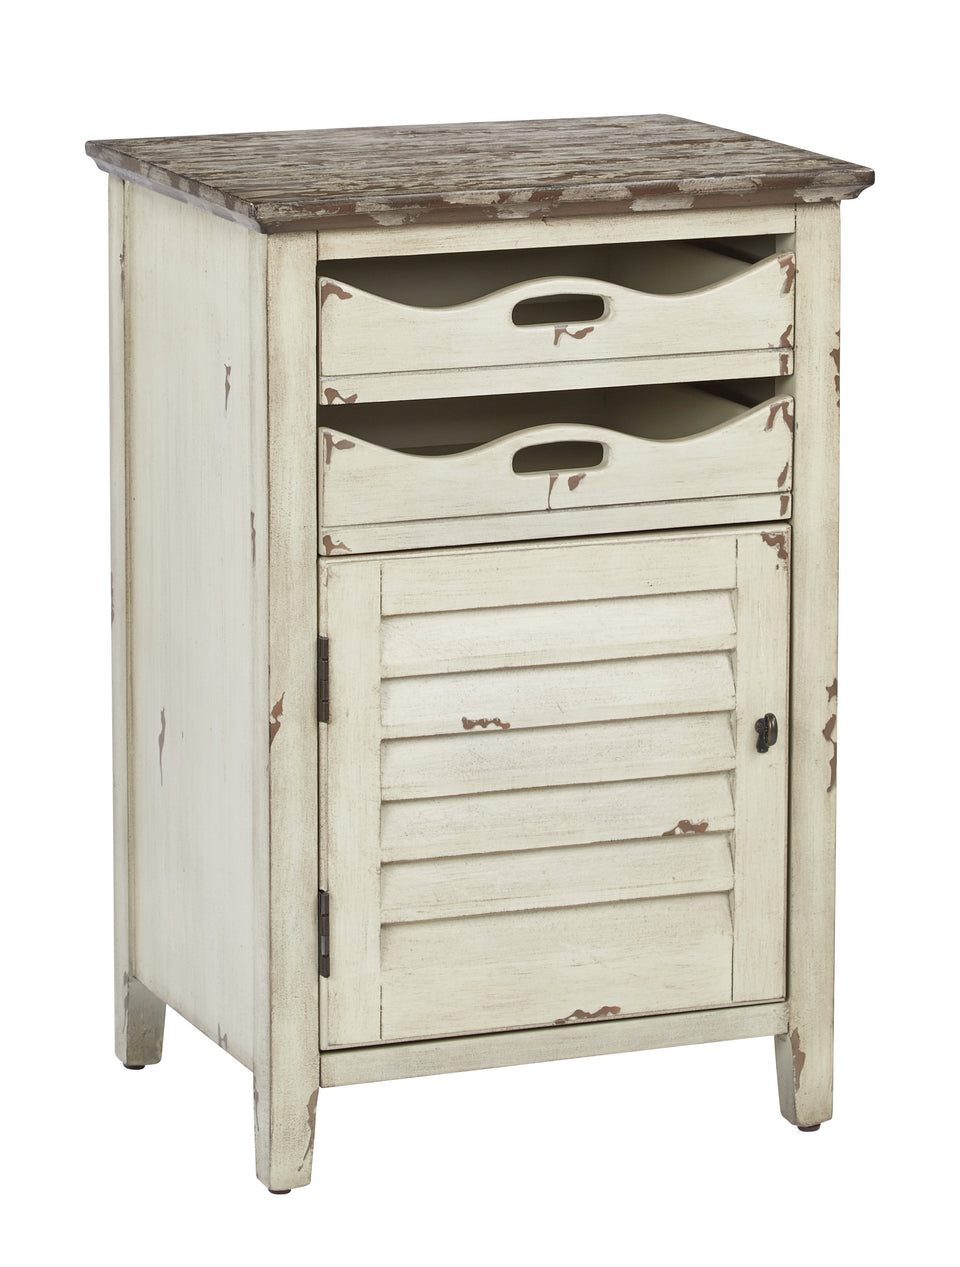 charlotte side table shutter door and two letter tray slide out drawers in distressed white